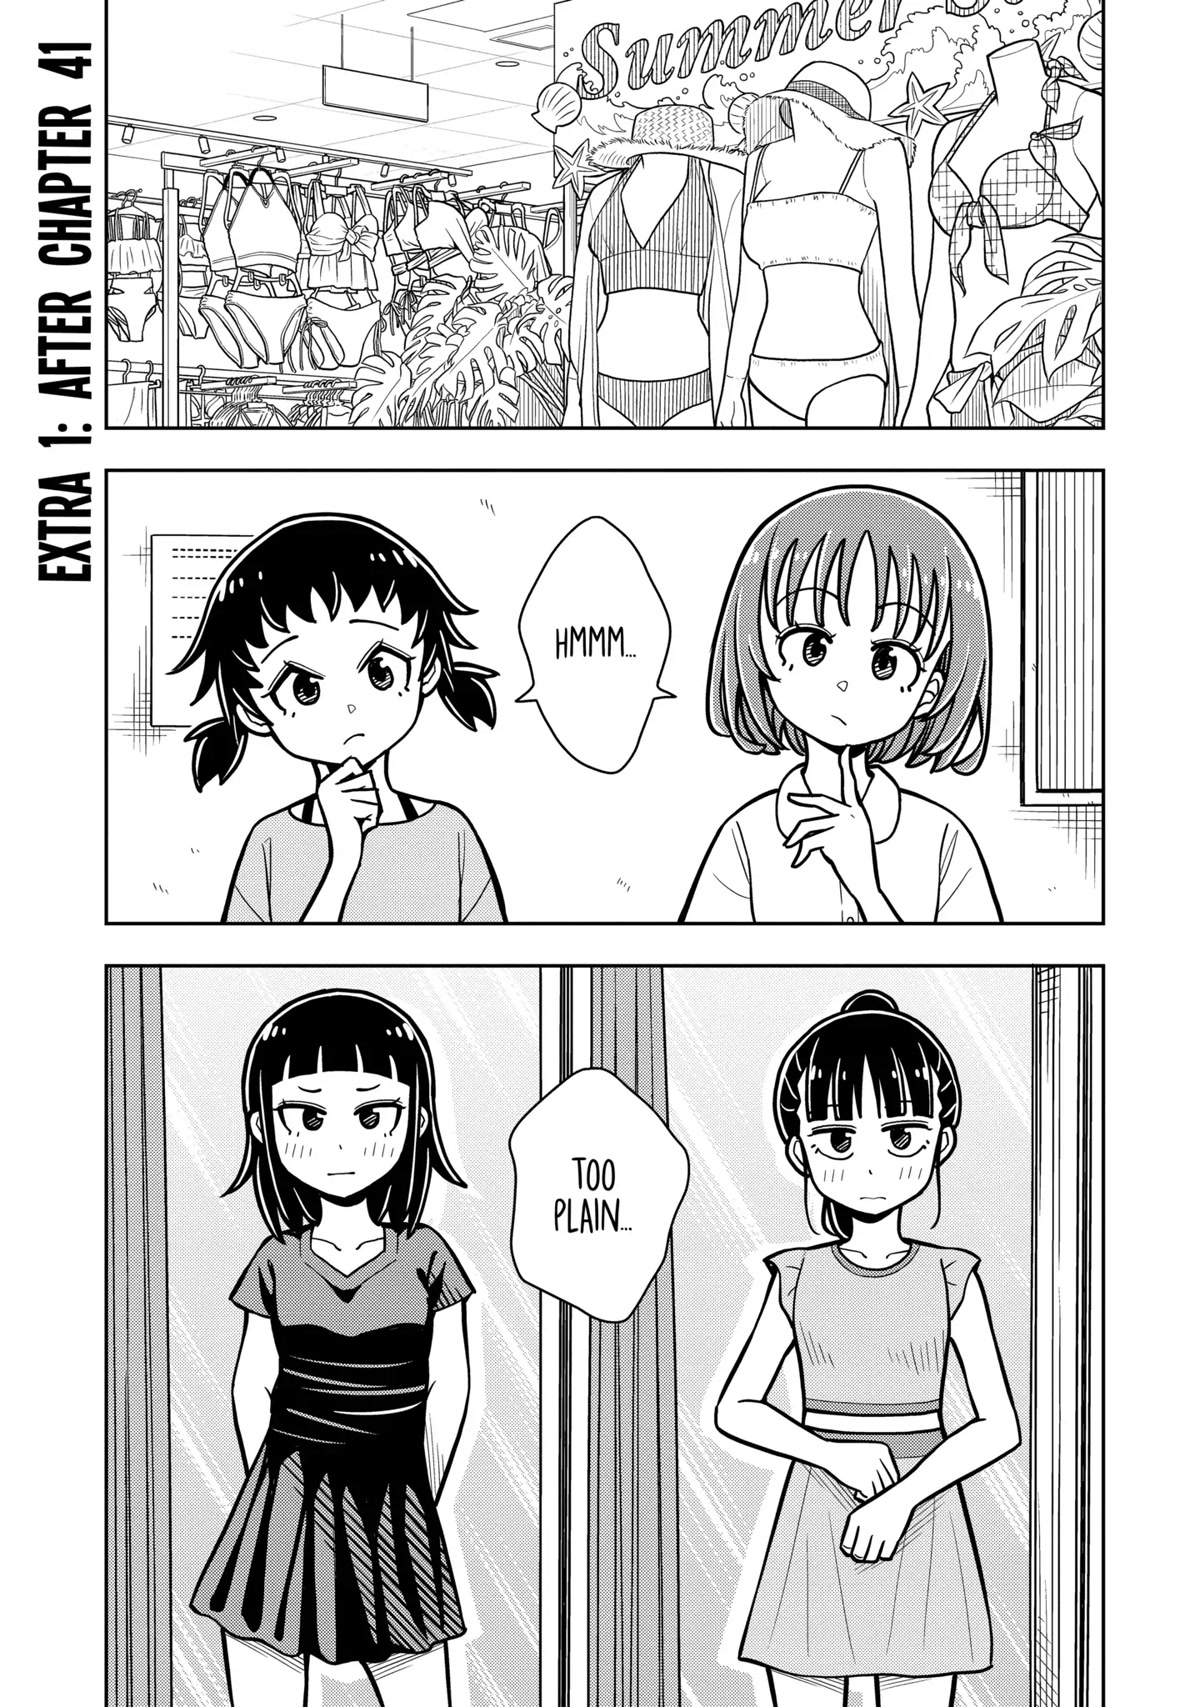 Starting Today She's My Childhood Friend - Page 1